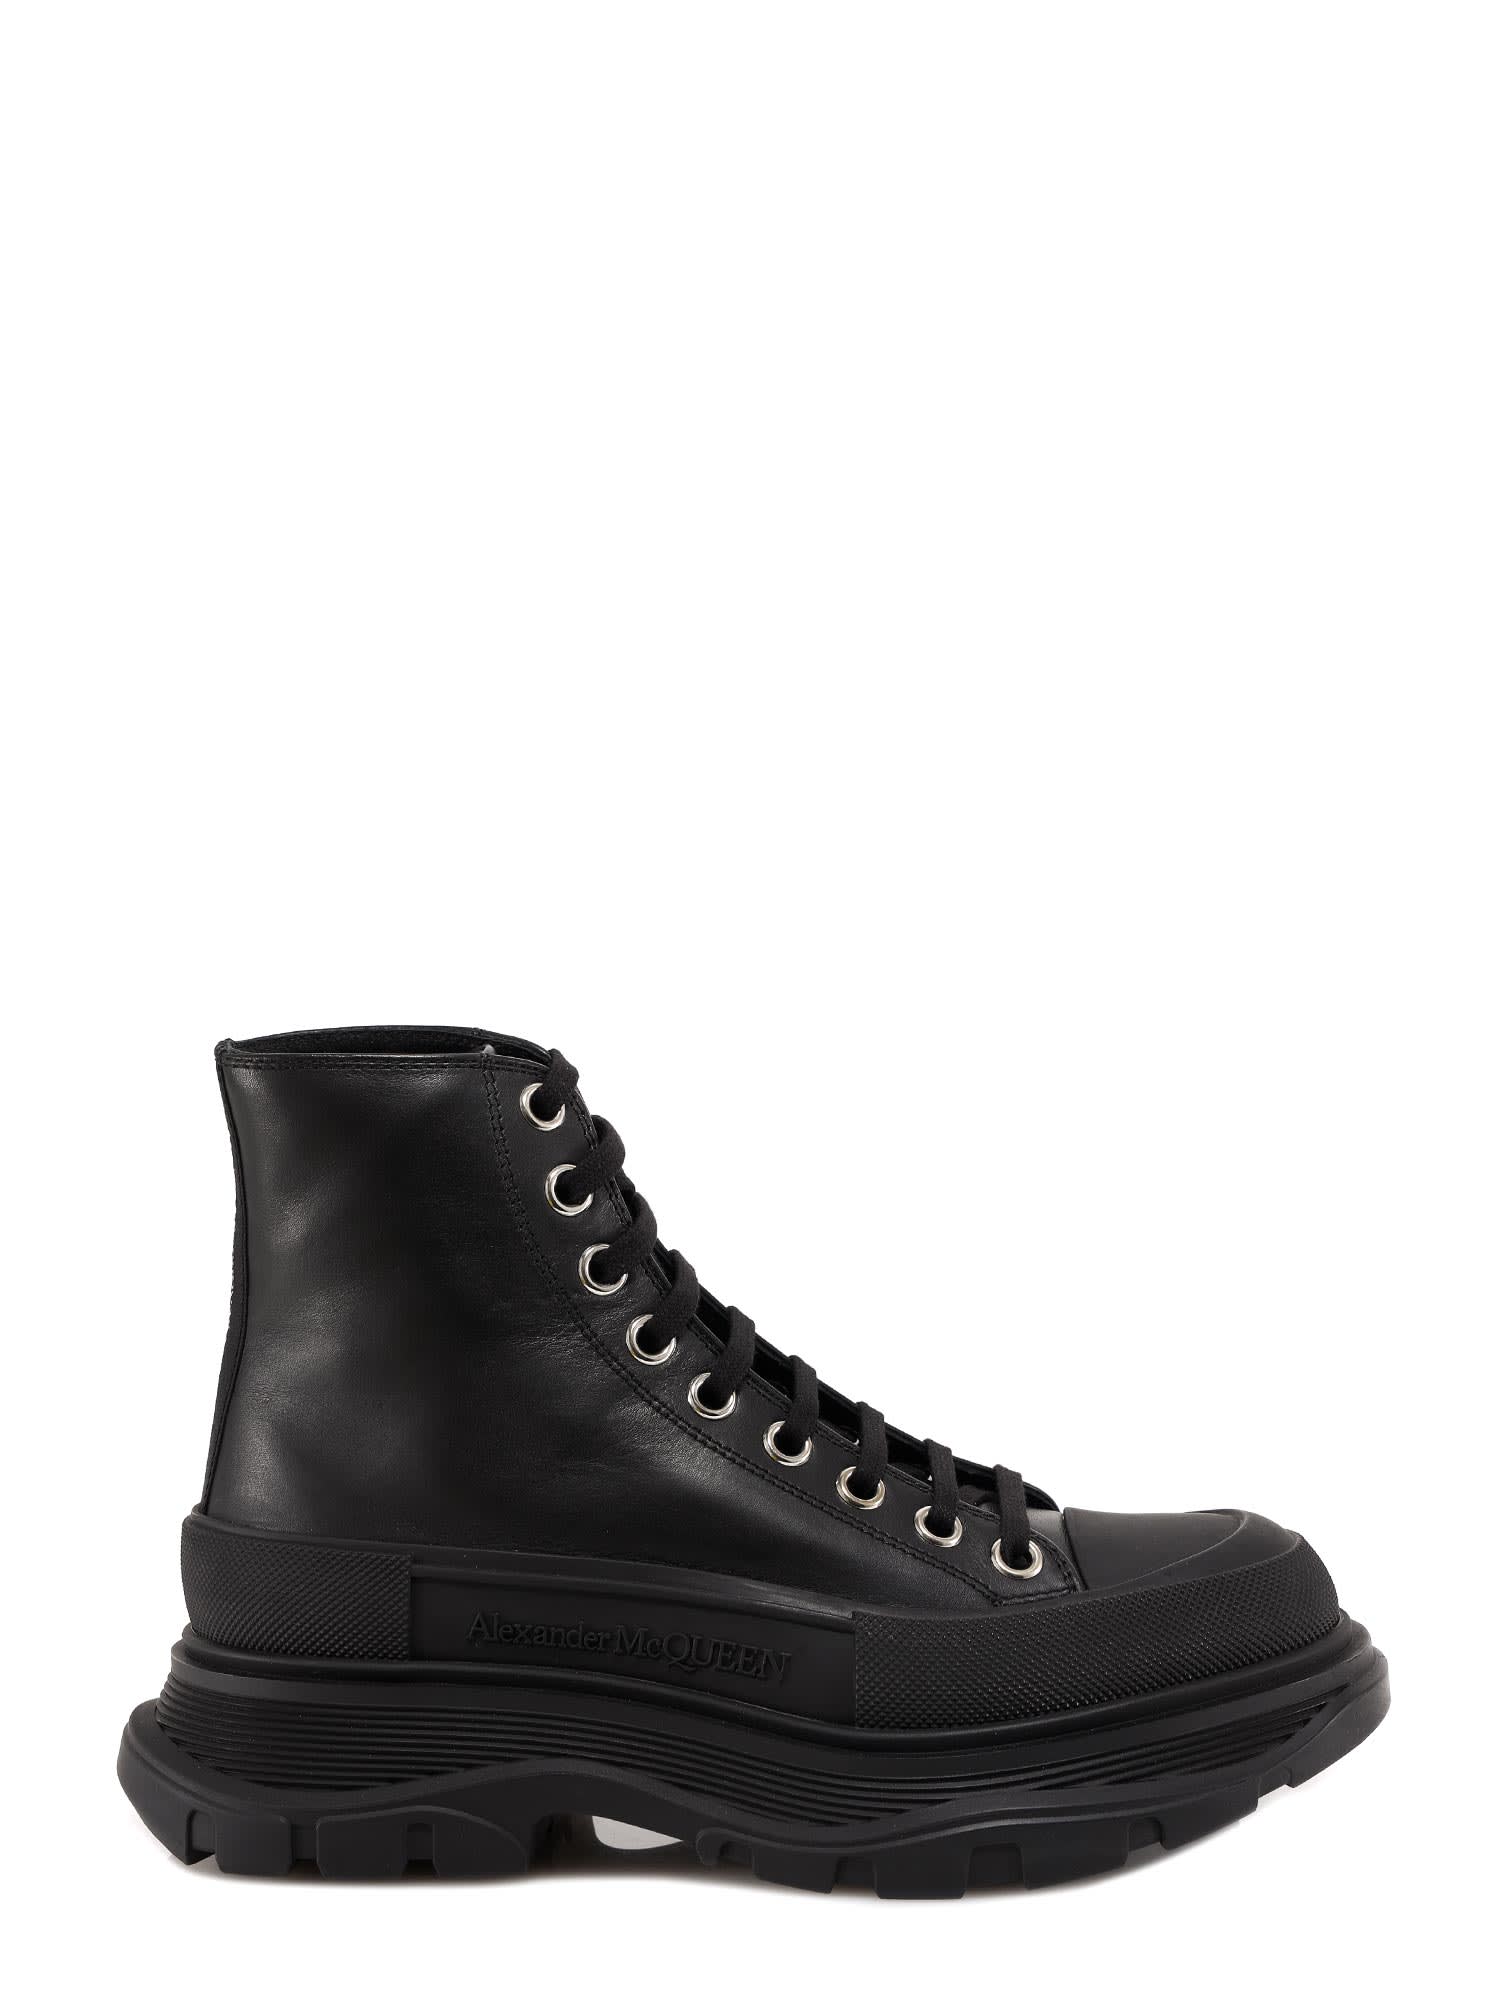 Buy Alexander McQueen Tread Slick Ankle Boot online, shop Alexander McQueen shoes with free shipping